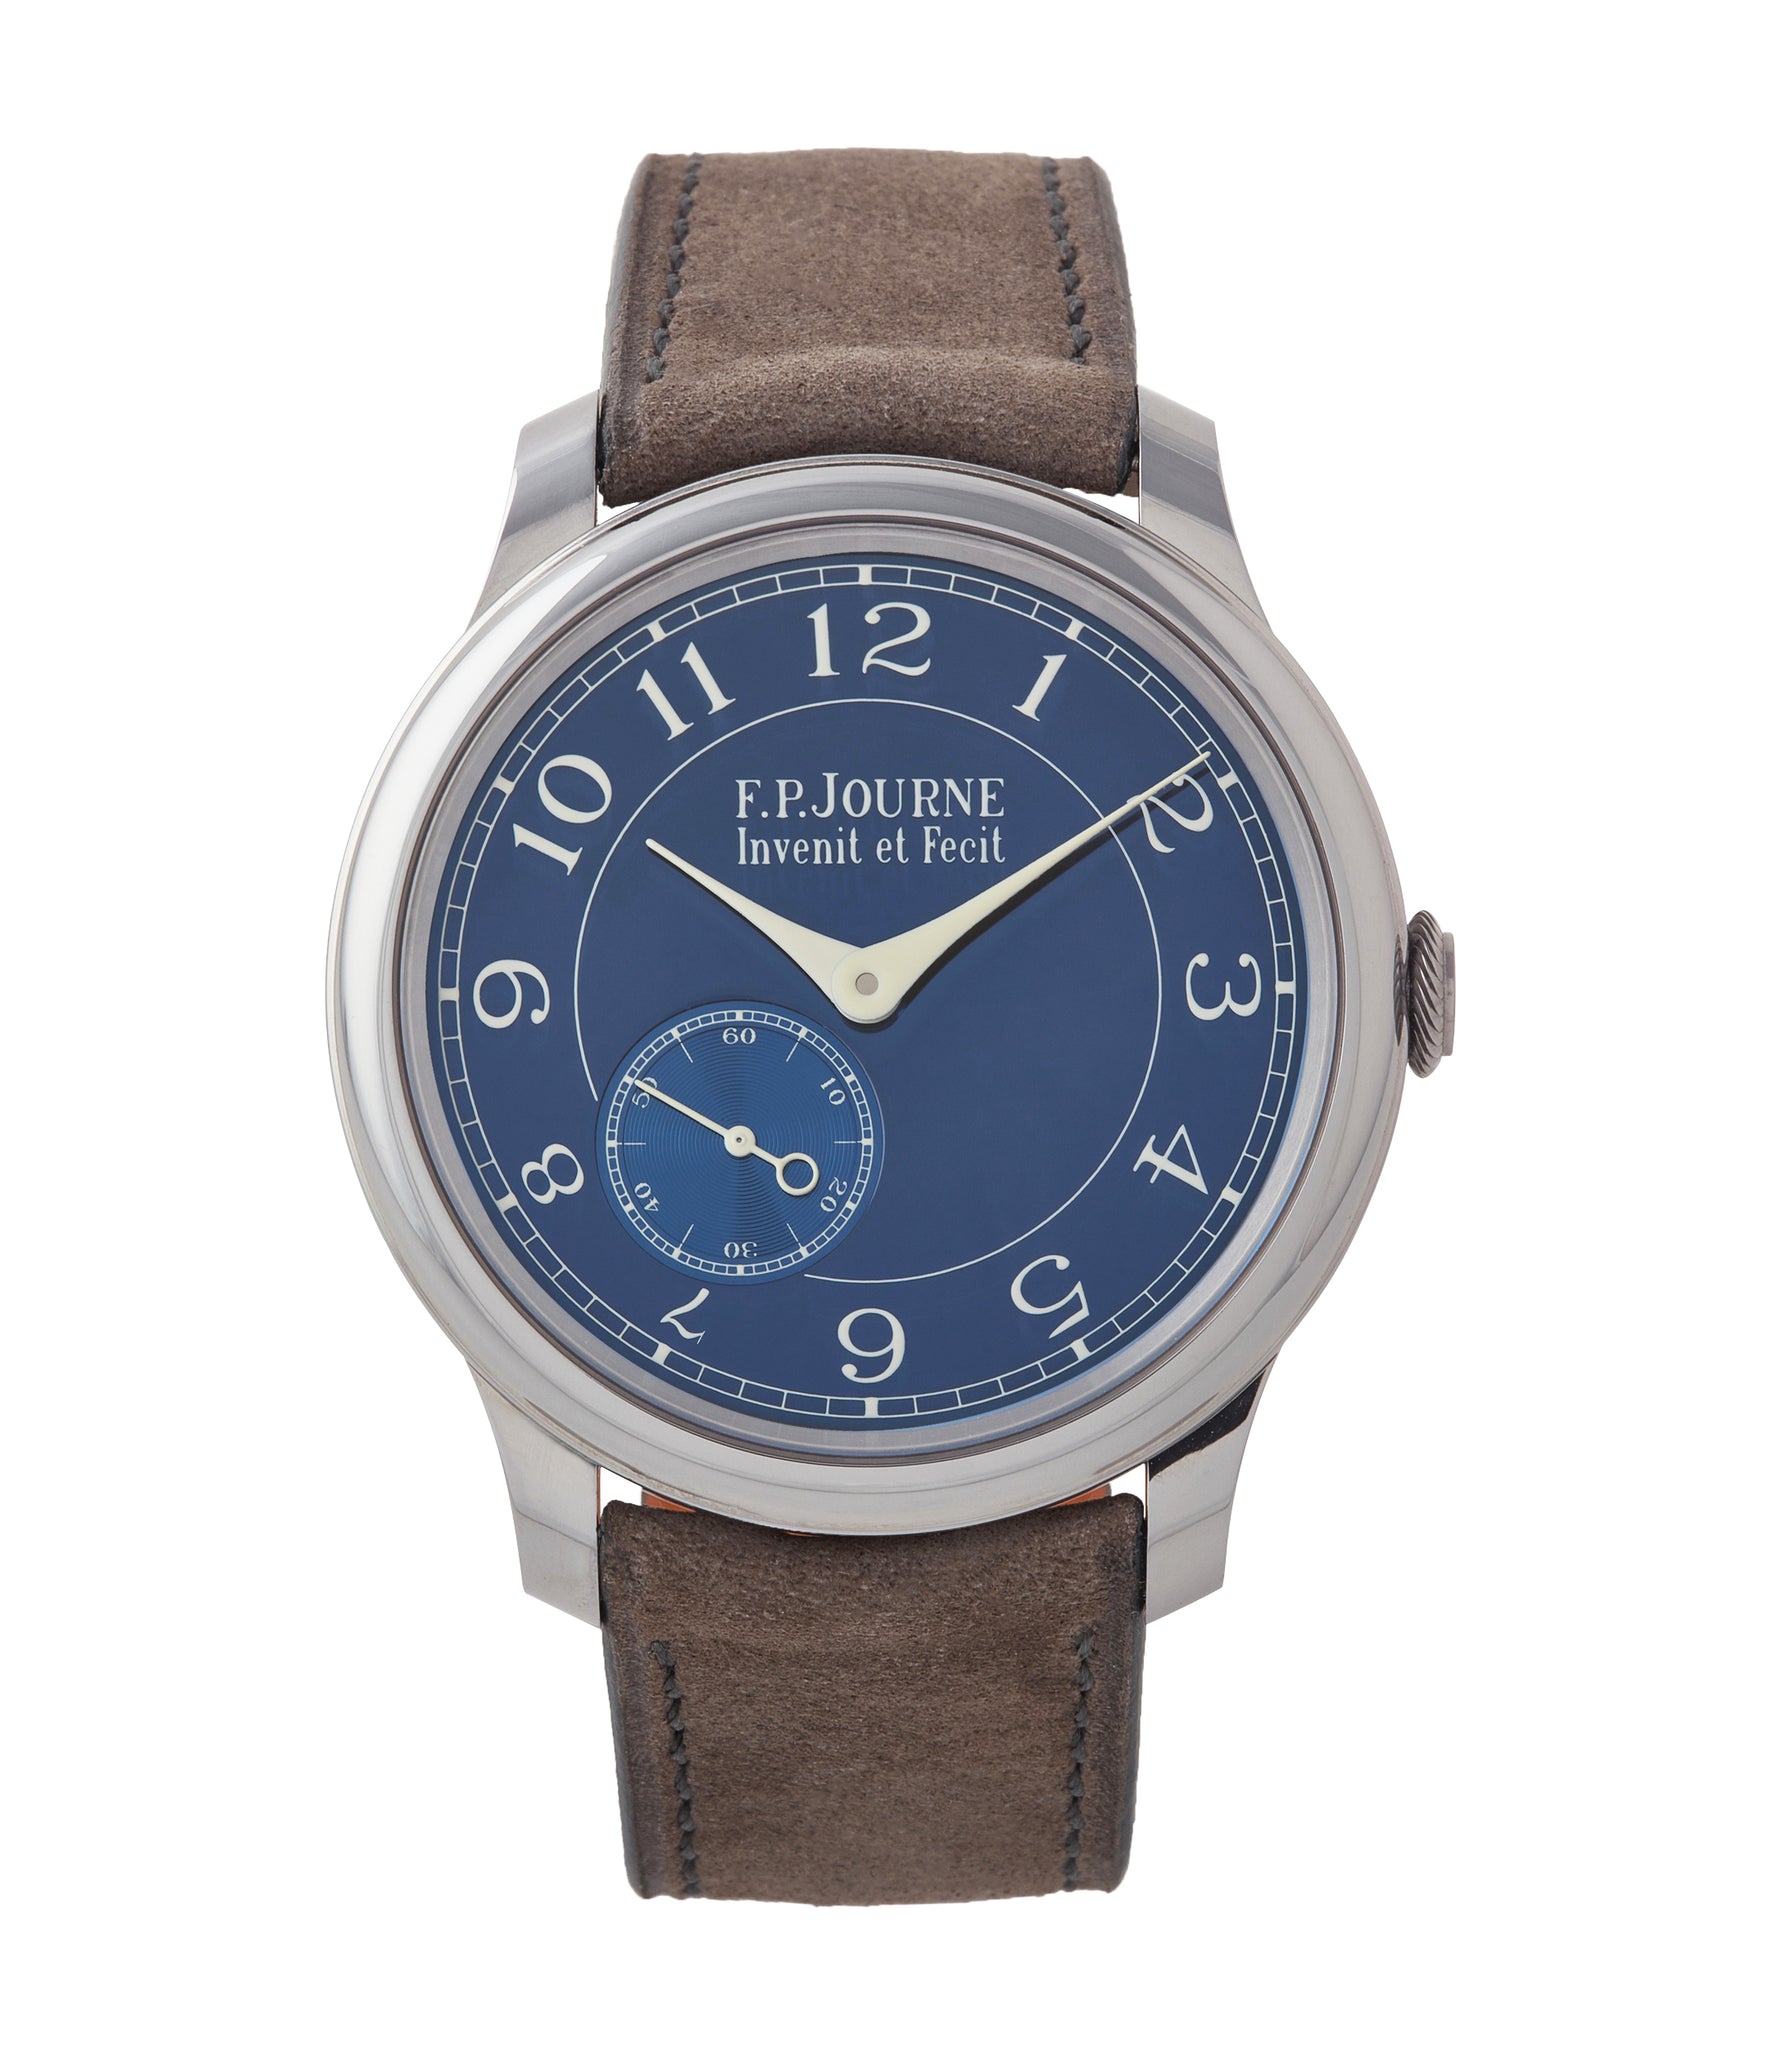 buy F. P. Journe Chronometre Bleu tantalum blue dial rare dress watch for sale online at A Collected Man London approved reseller of independent watchmakers